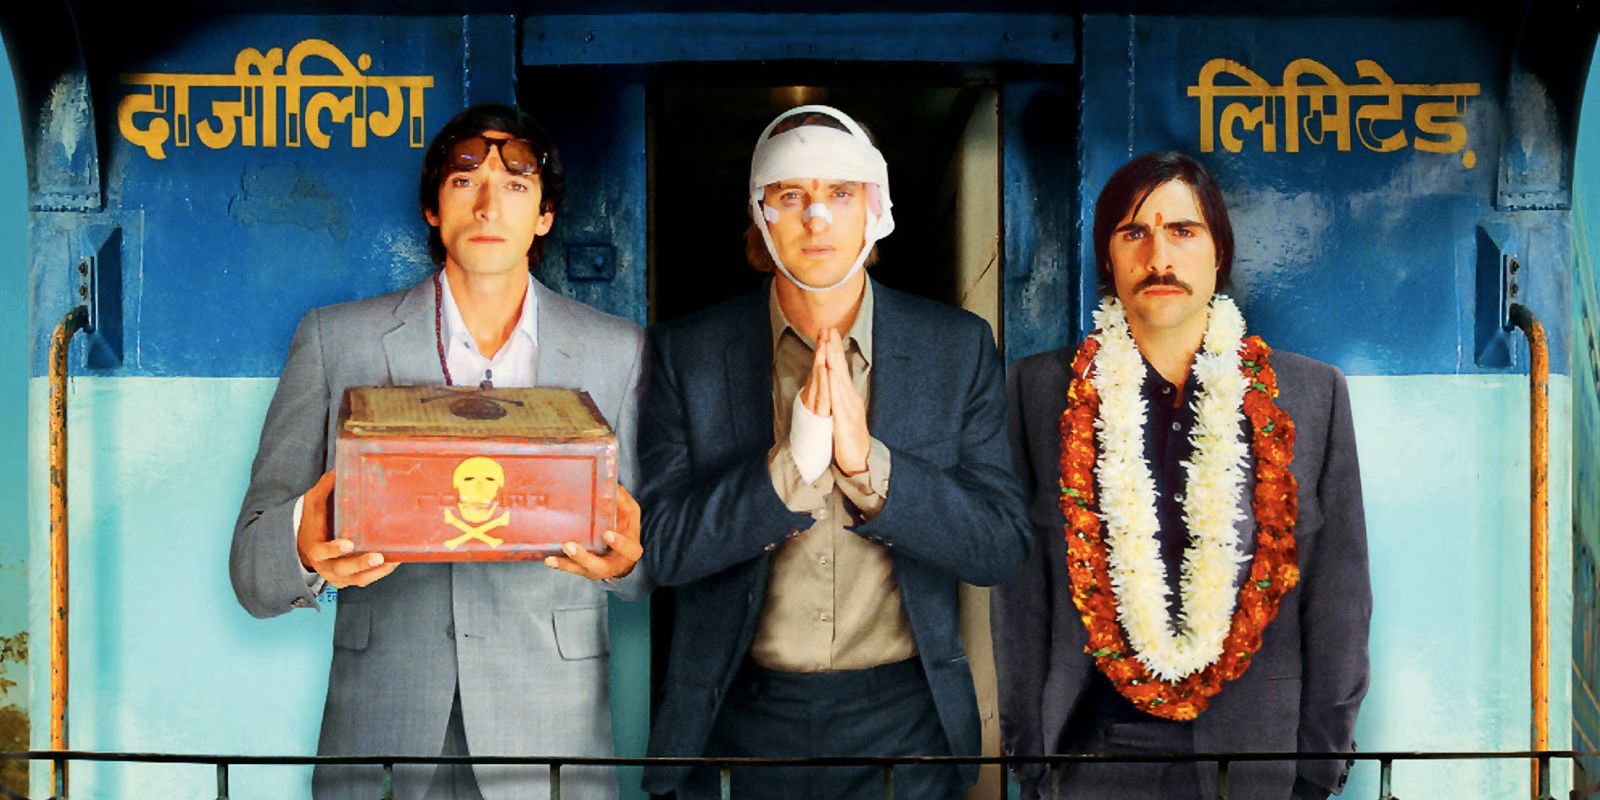 How The Darjeeling Limited Explores Grief With Cross-Cultural Experience